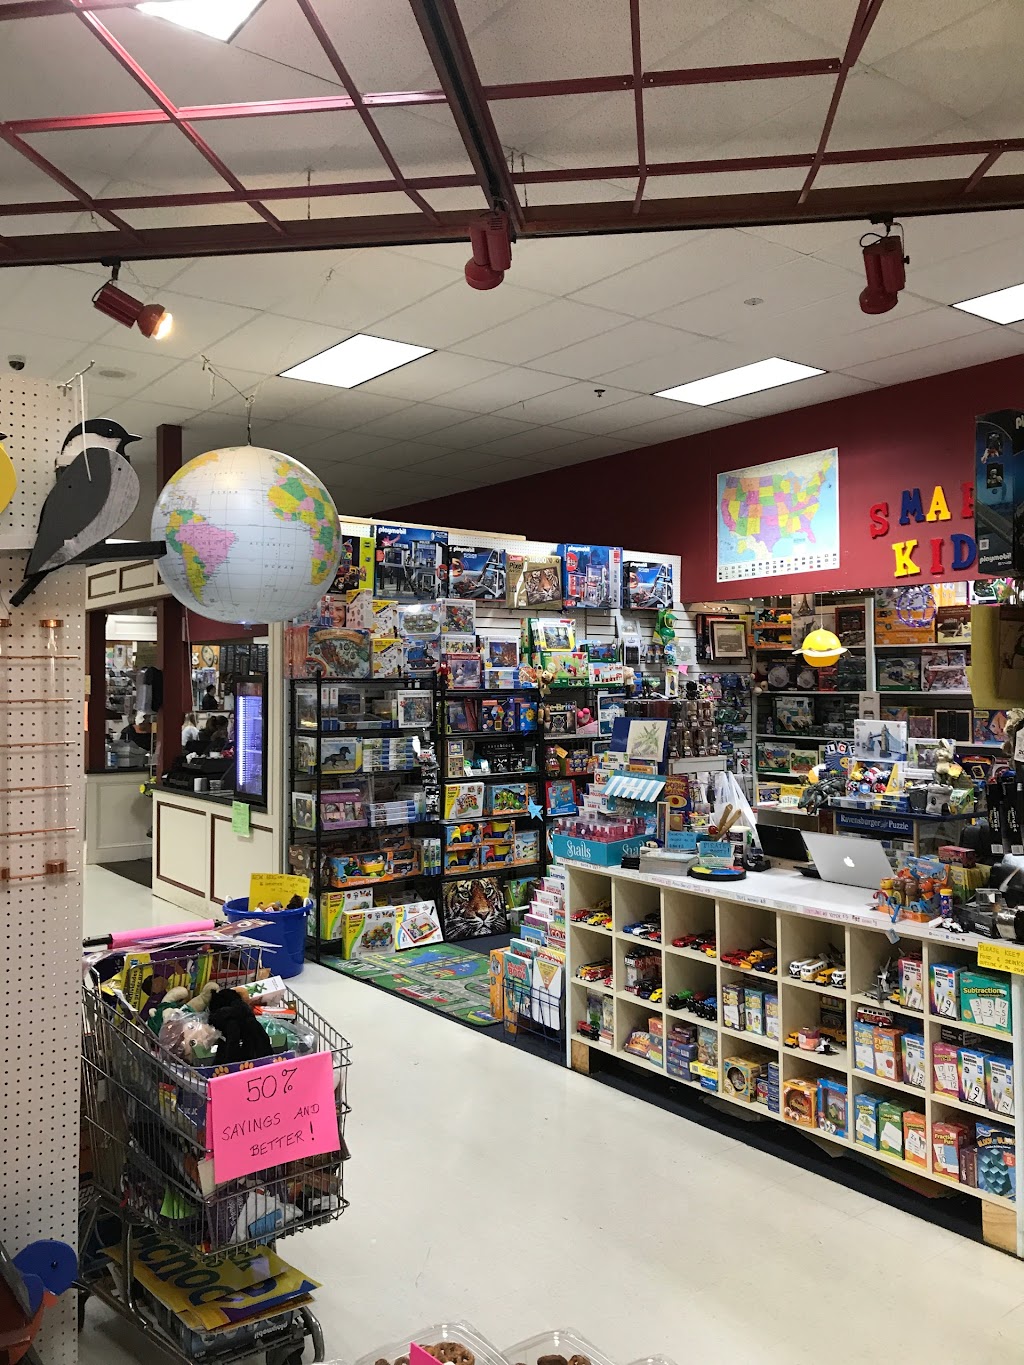 SMART KIDS TOY STORE | Inside the Amish Market, 11121 York Rd, Cockeysville, MD 21030 | Phone: (443) 286-4975